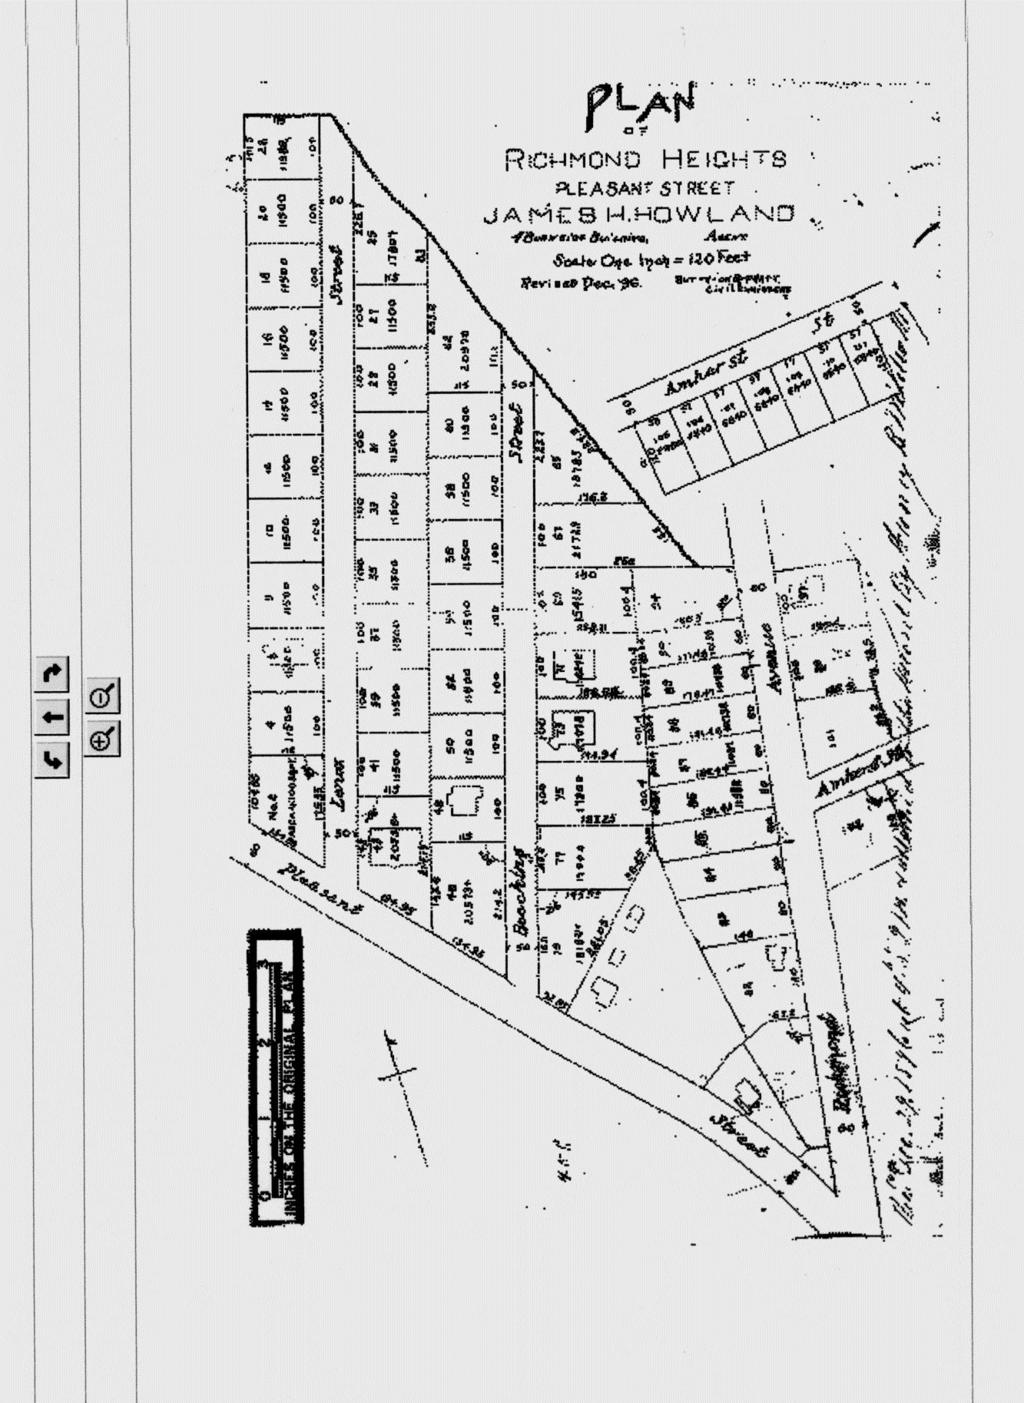 Subdivision Plan: Richmond Heights (revised) James H.